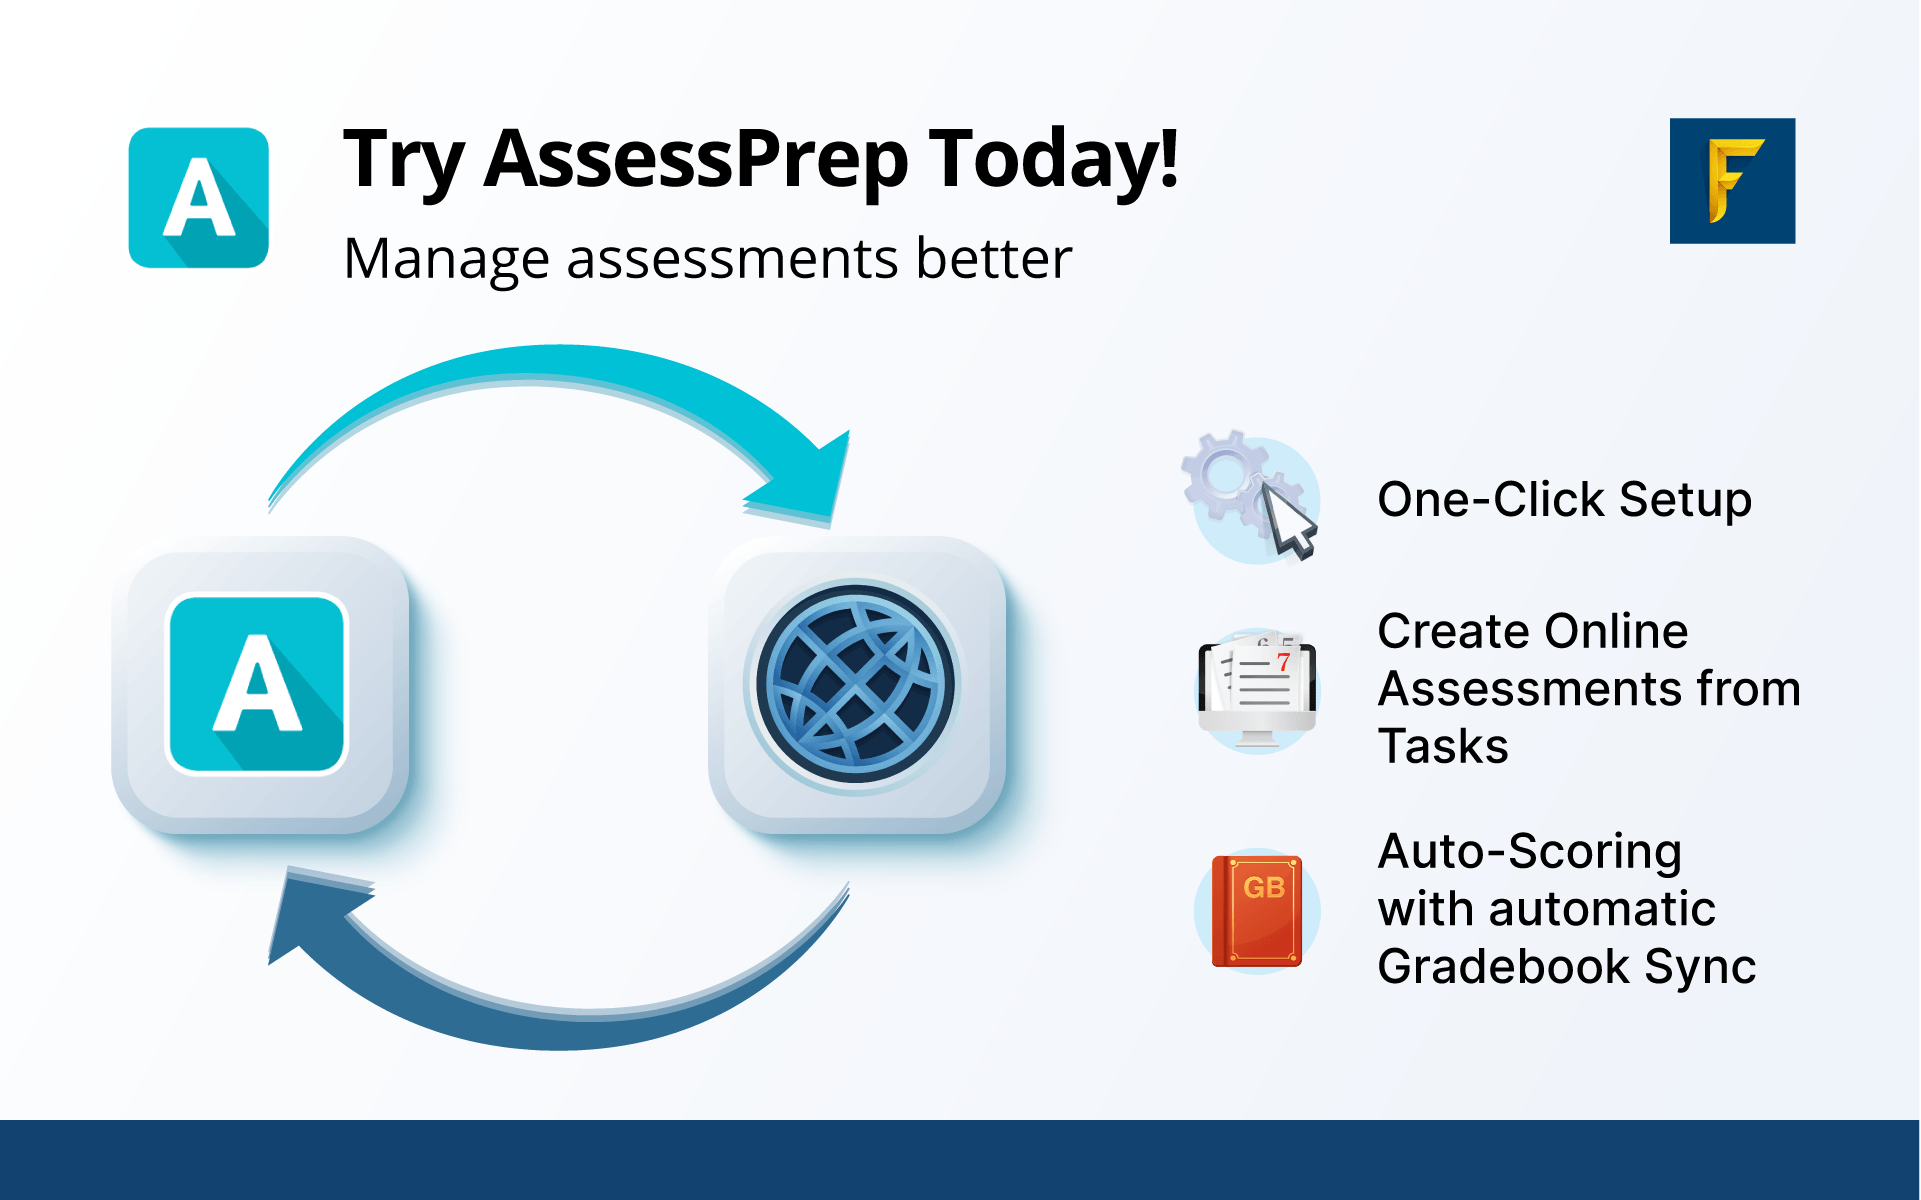 Try AssessPrep Today!